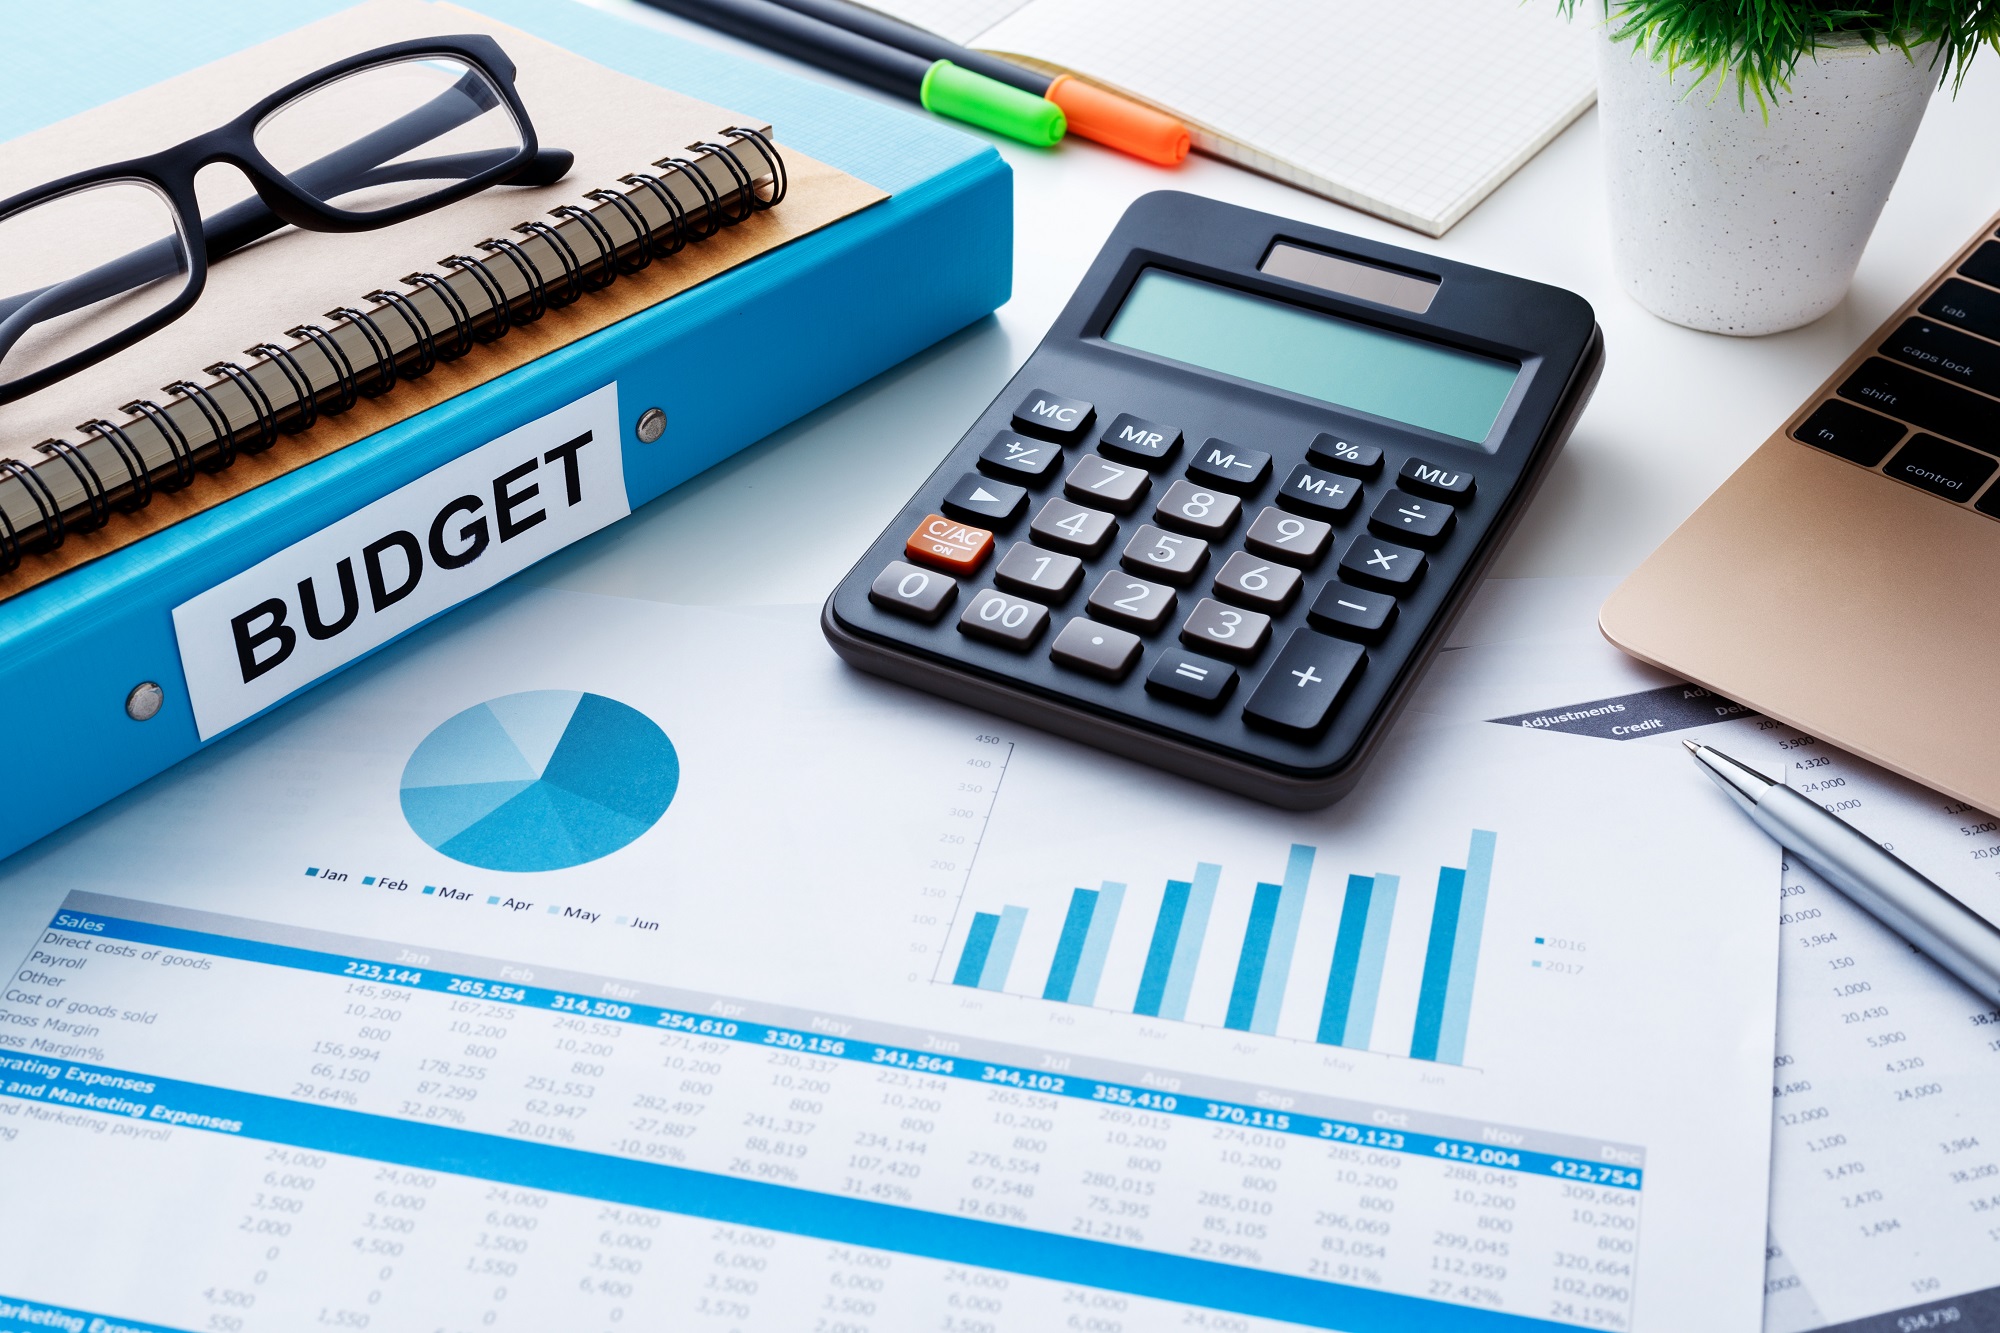 Business Travel Budgeting Tips For 2022